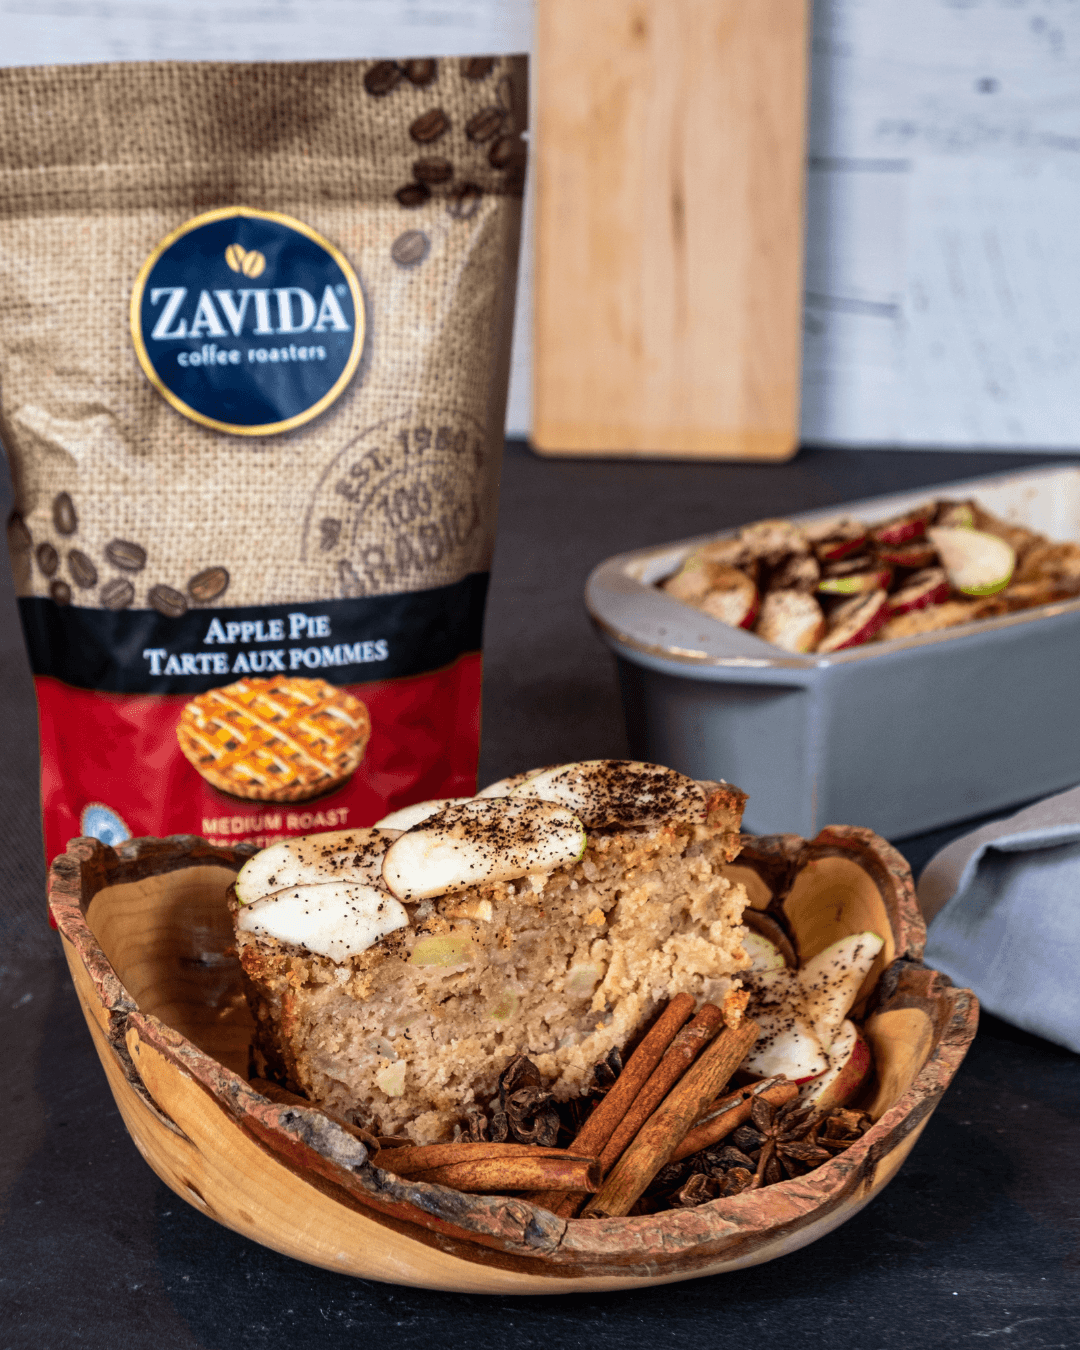 Easy apple coffee cake is cut and placed in a wooden bowl next to the pan and a bag of Zavida's Apple Pie Coffee